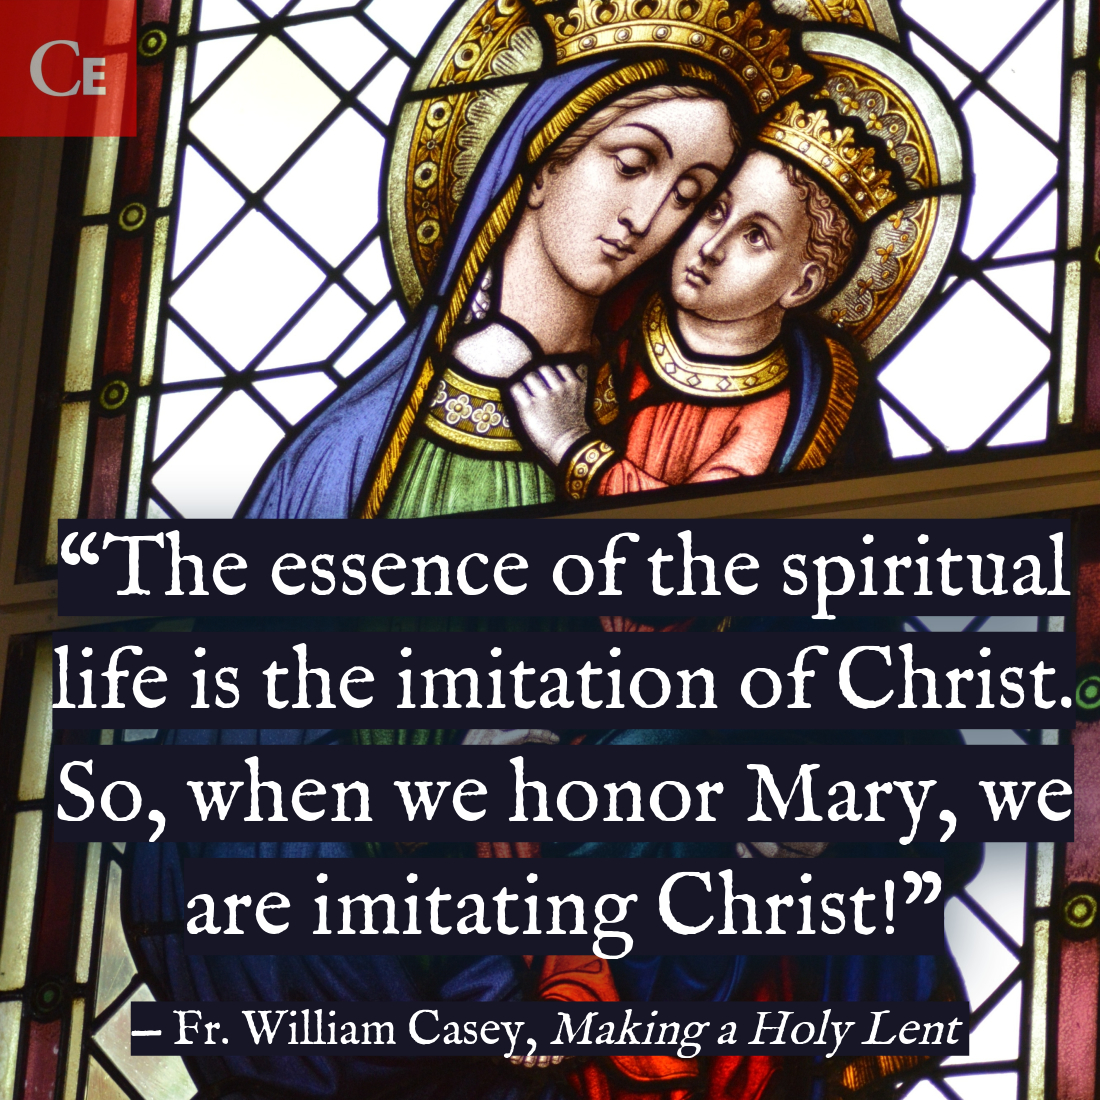 “The essence of the spiritual life is the imitation of Christ. So, when we honor Mary, we are imitating Christ!”